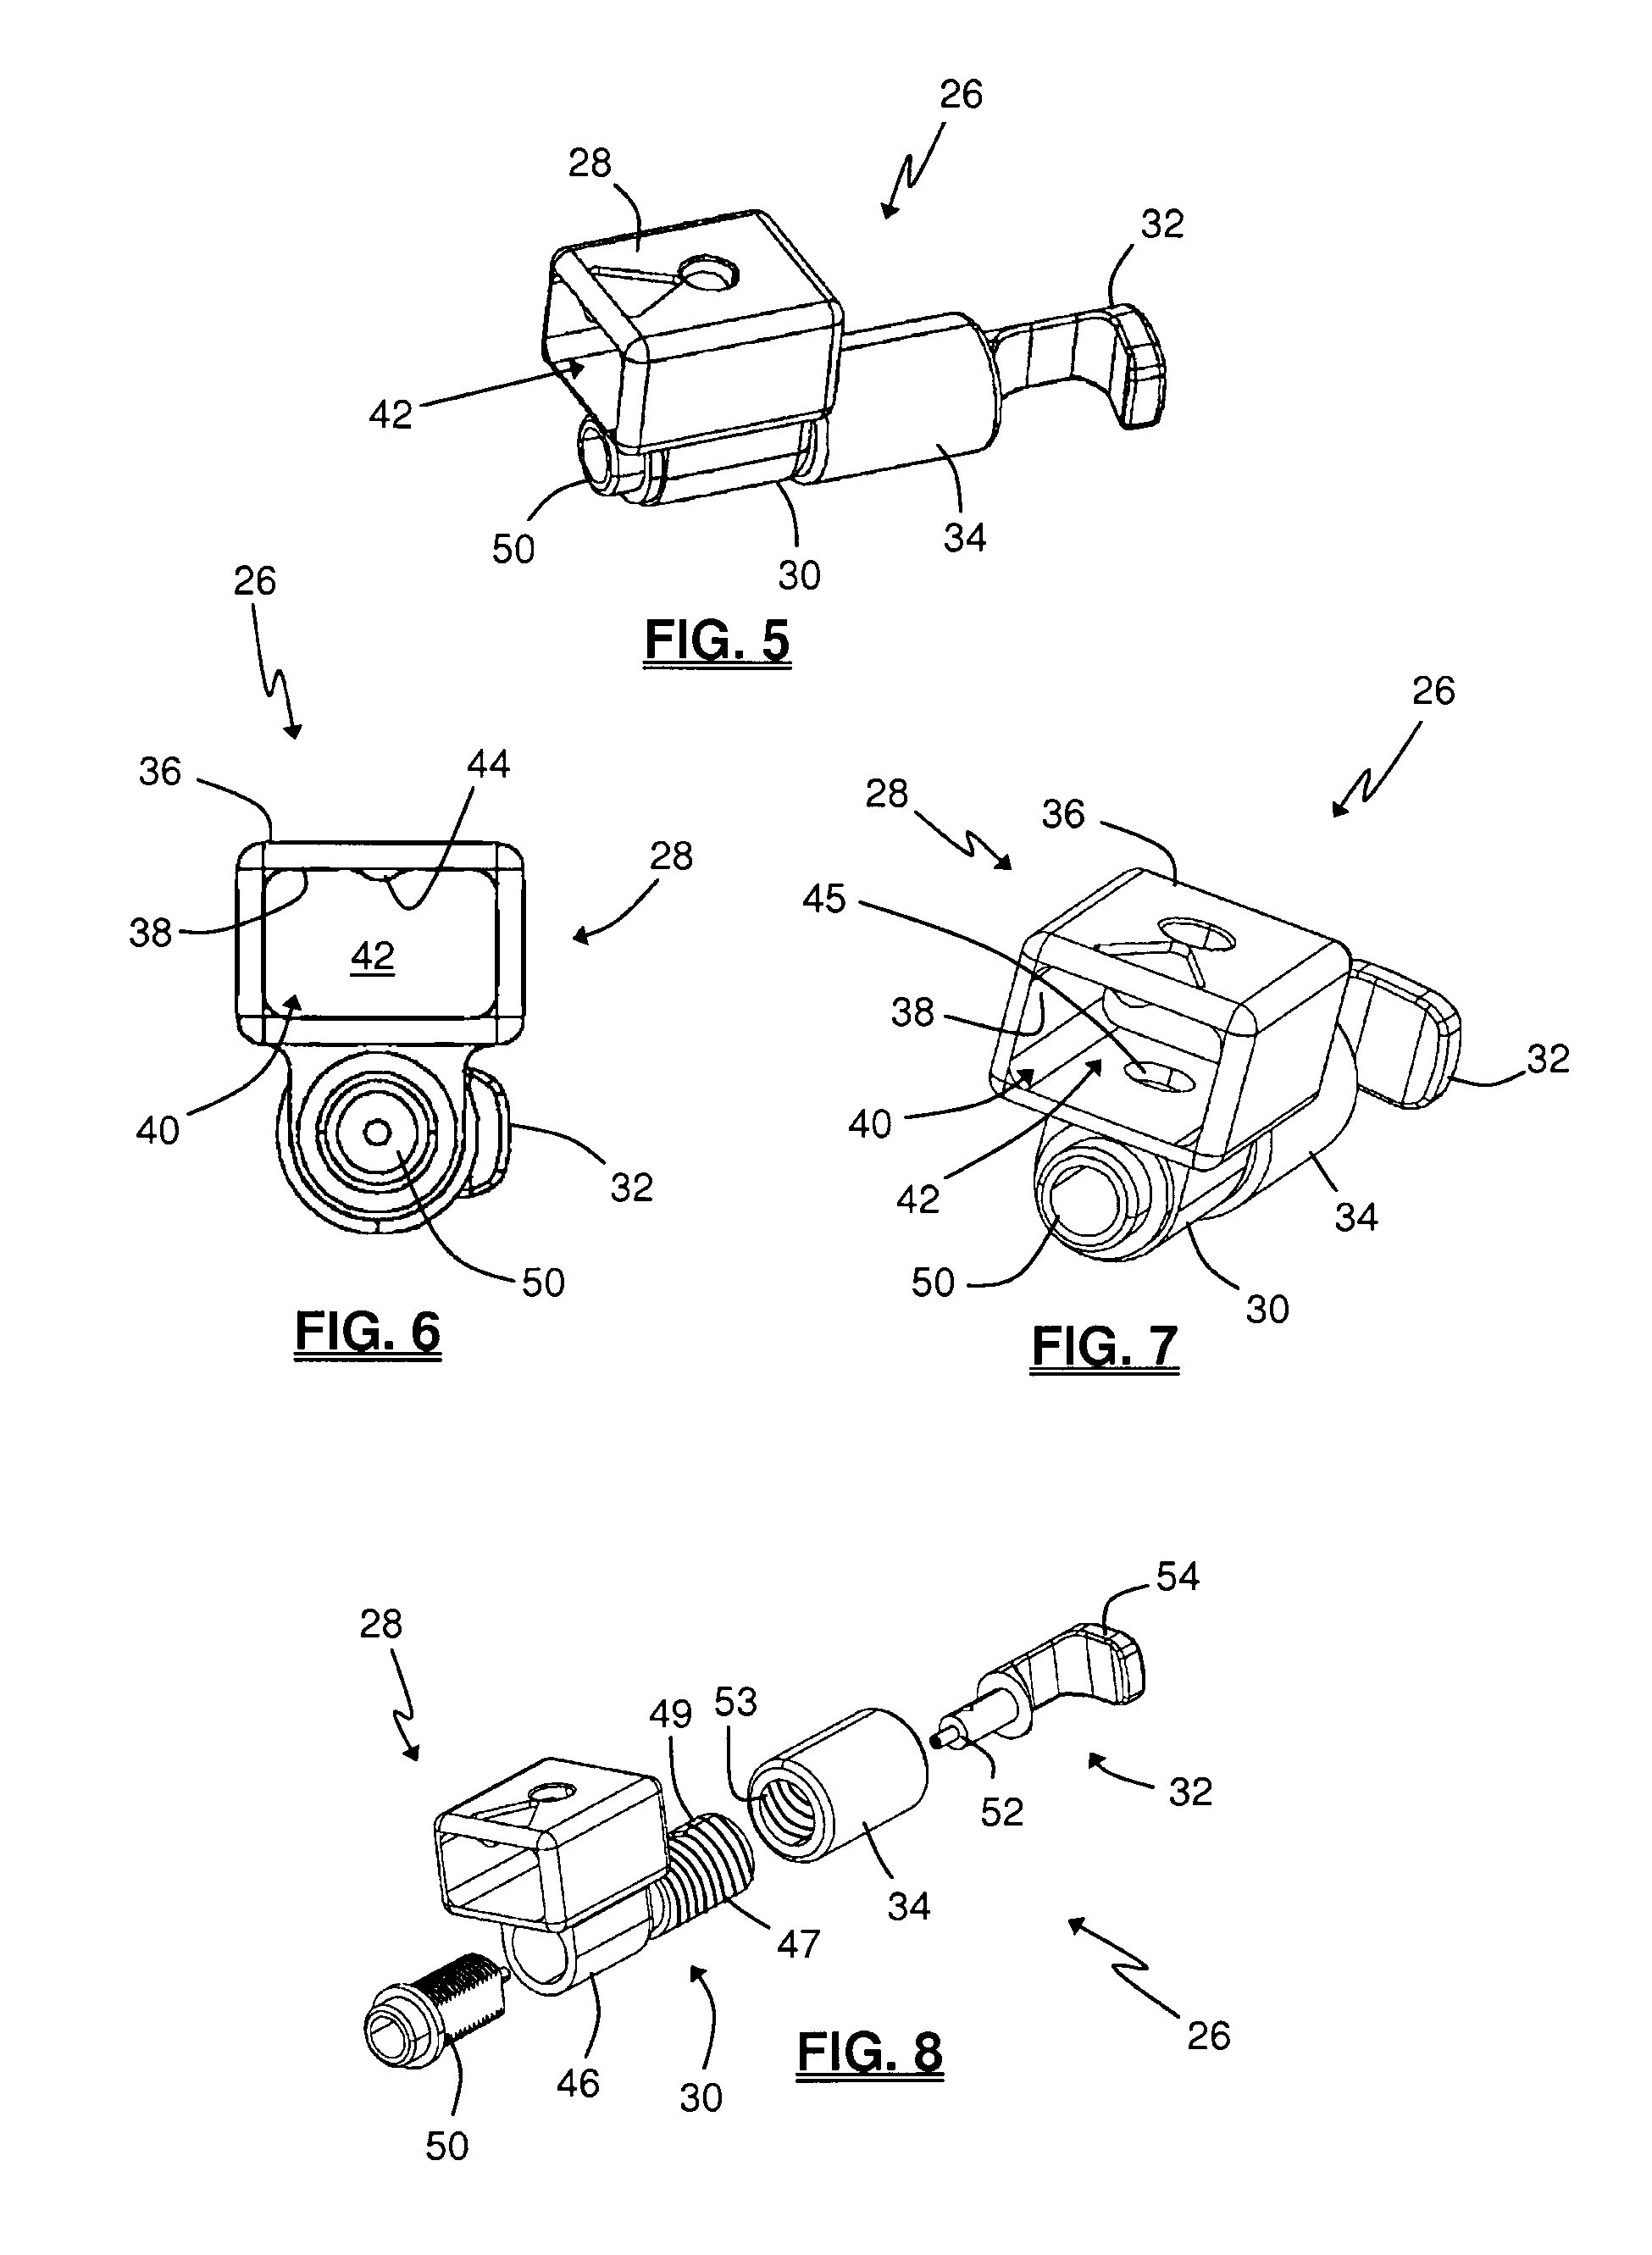 Surgical trajectory monitoring system and related methods